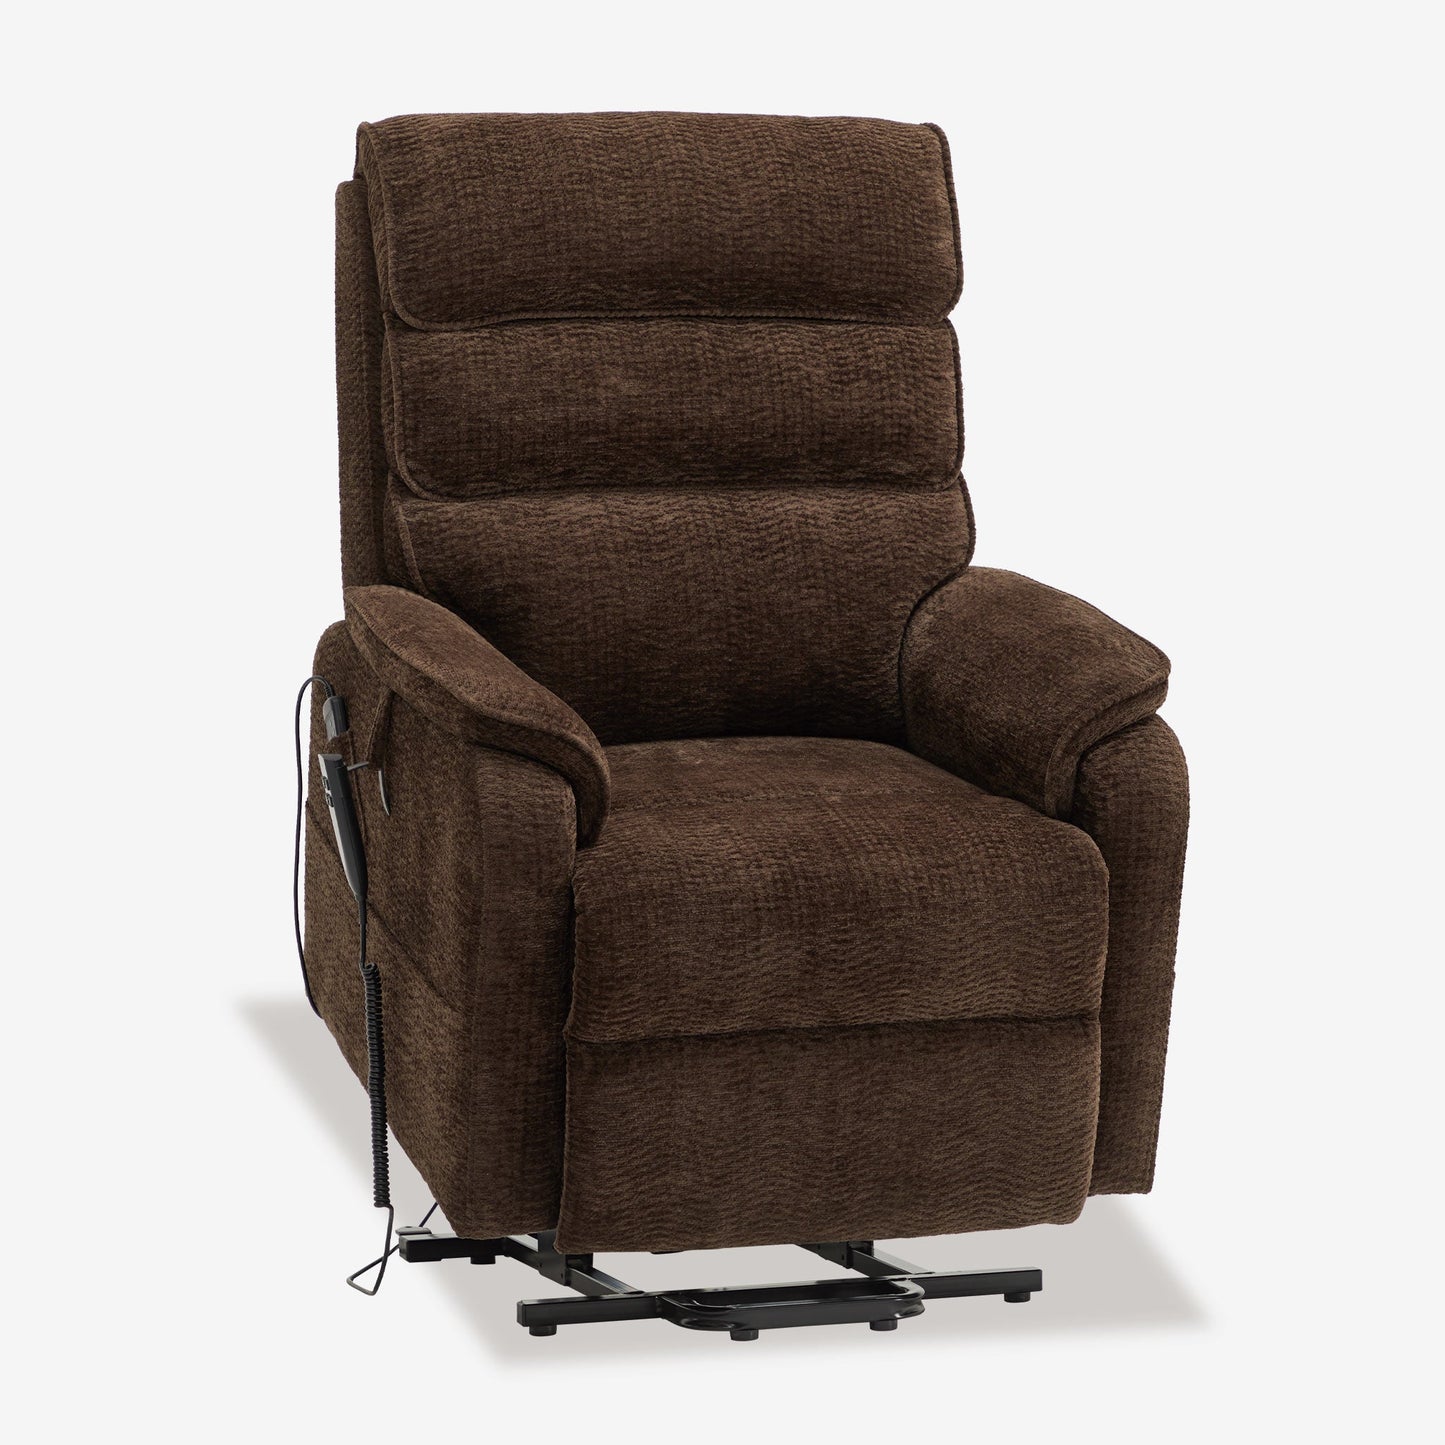 Lay Flat Lift Recliner With Heat&massage And Infinite Positons